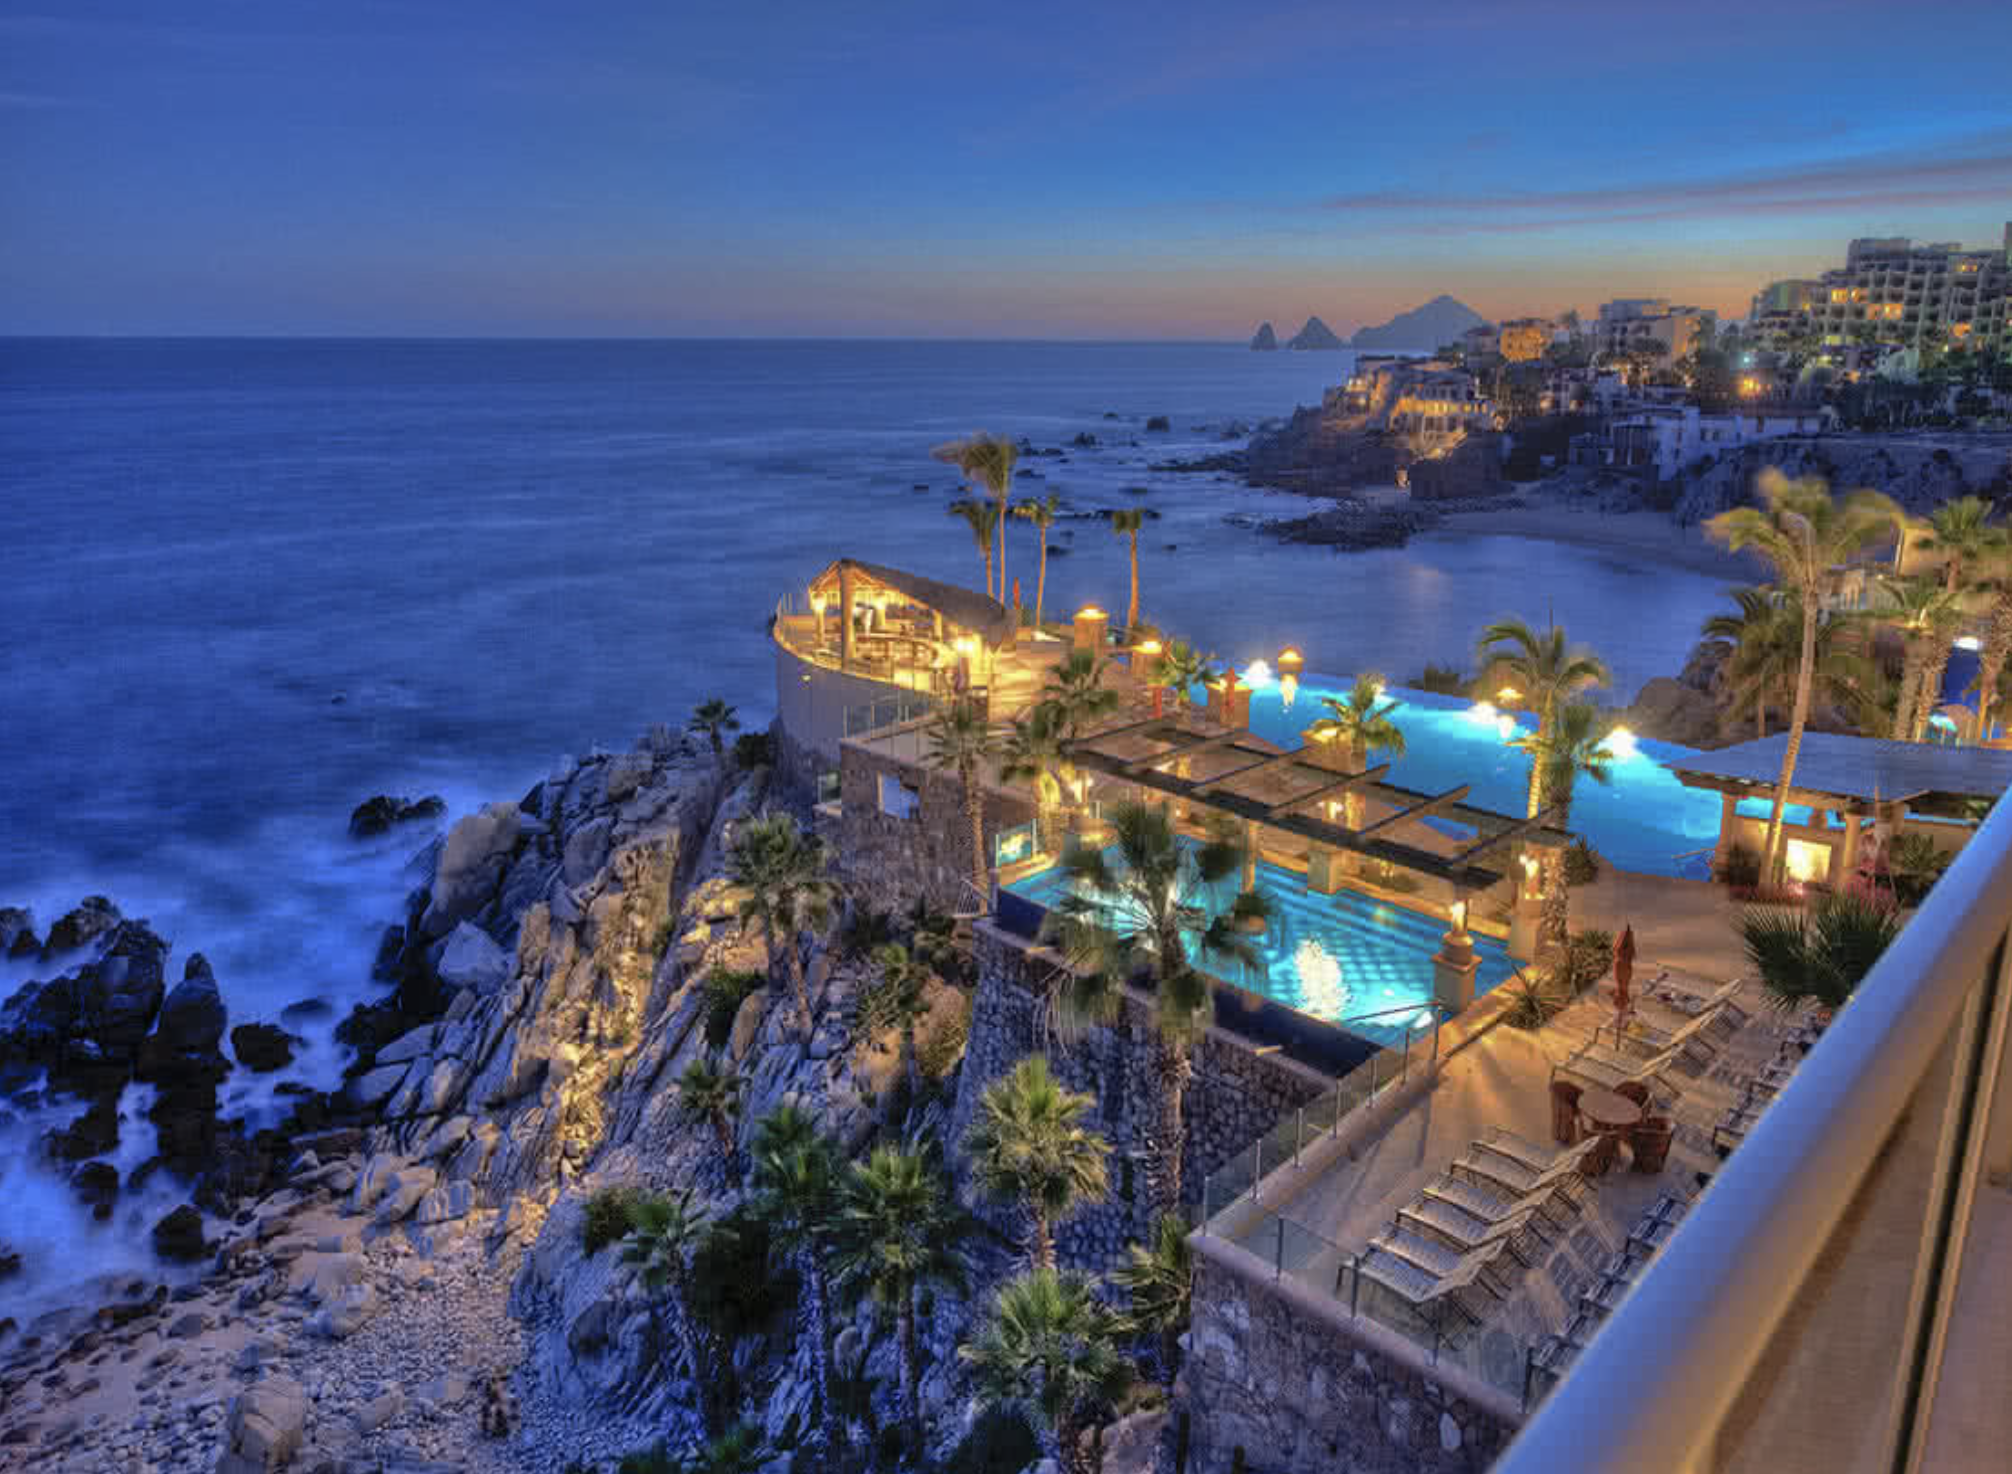 a pool on a cliff overlooking a beach